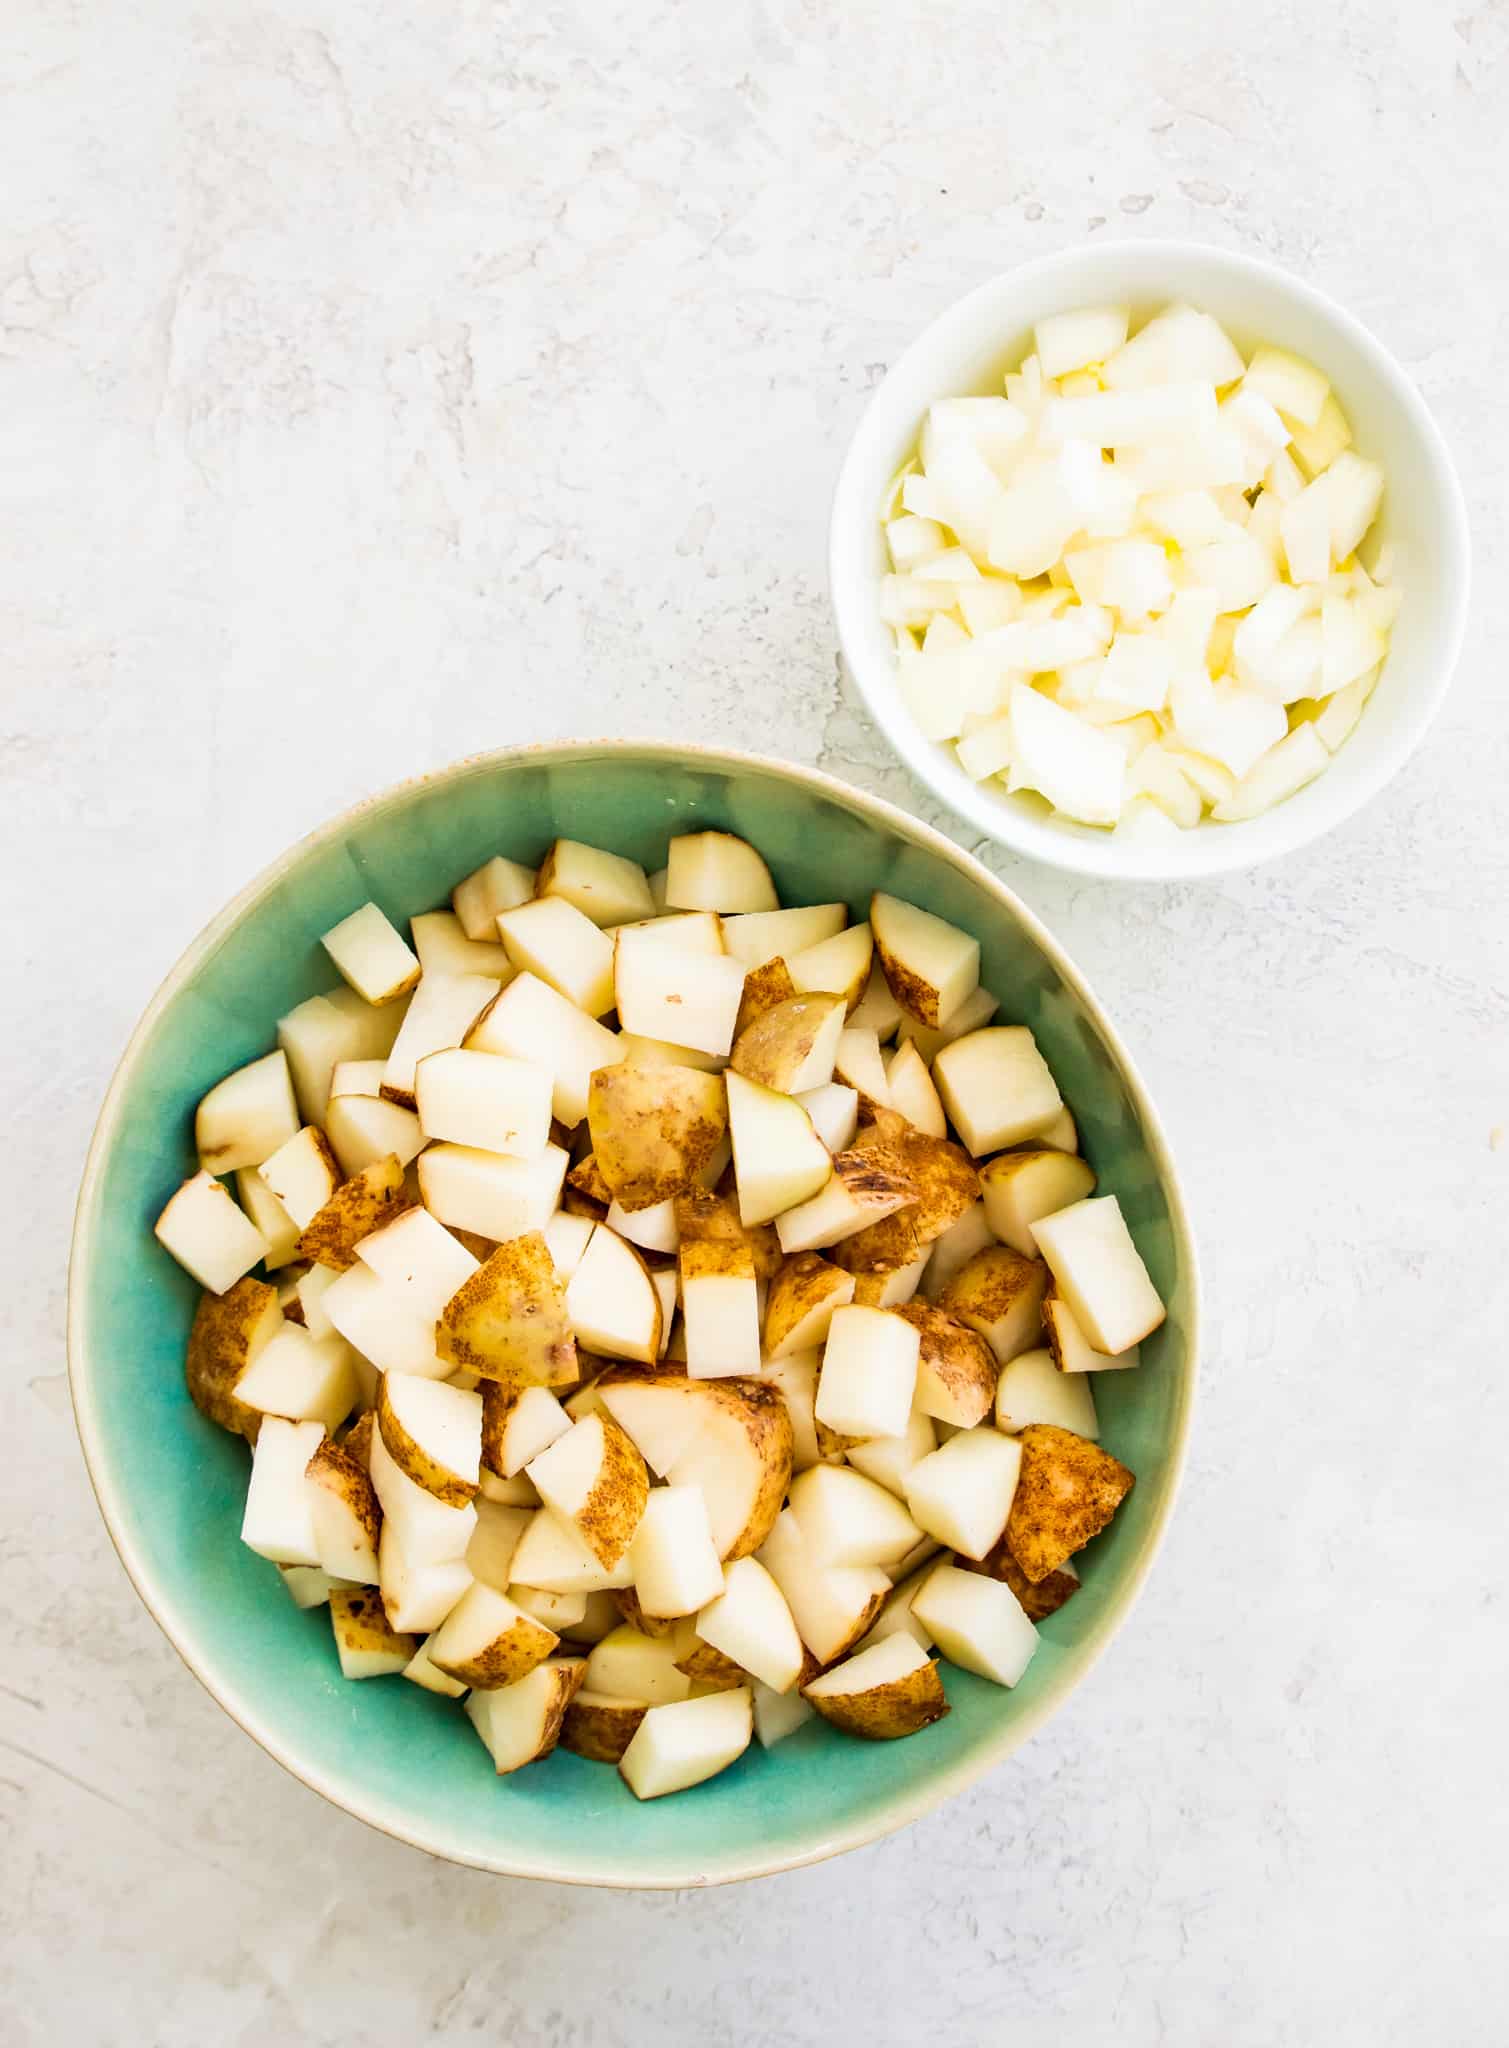 Bowls of chopped potatoes and chopped onions. 